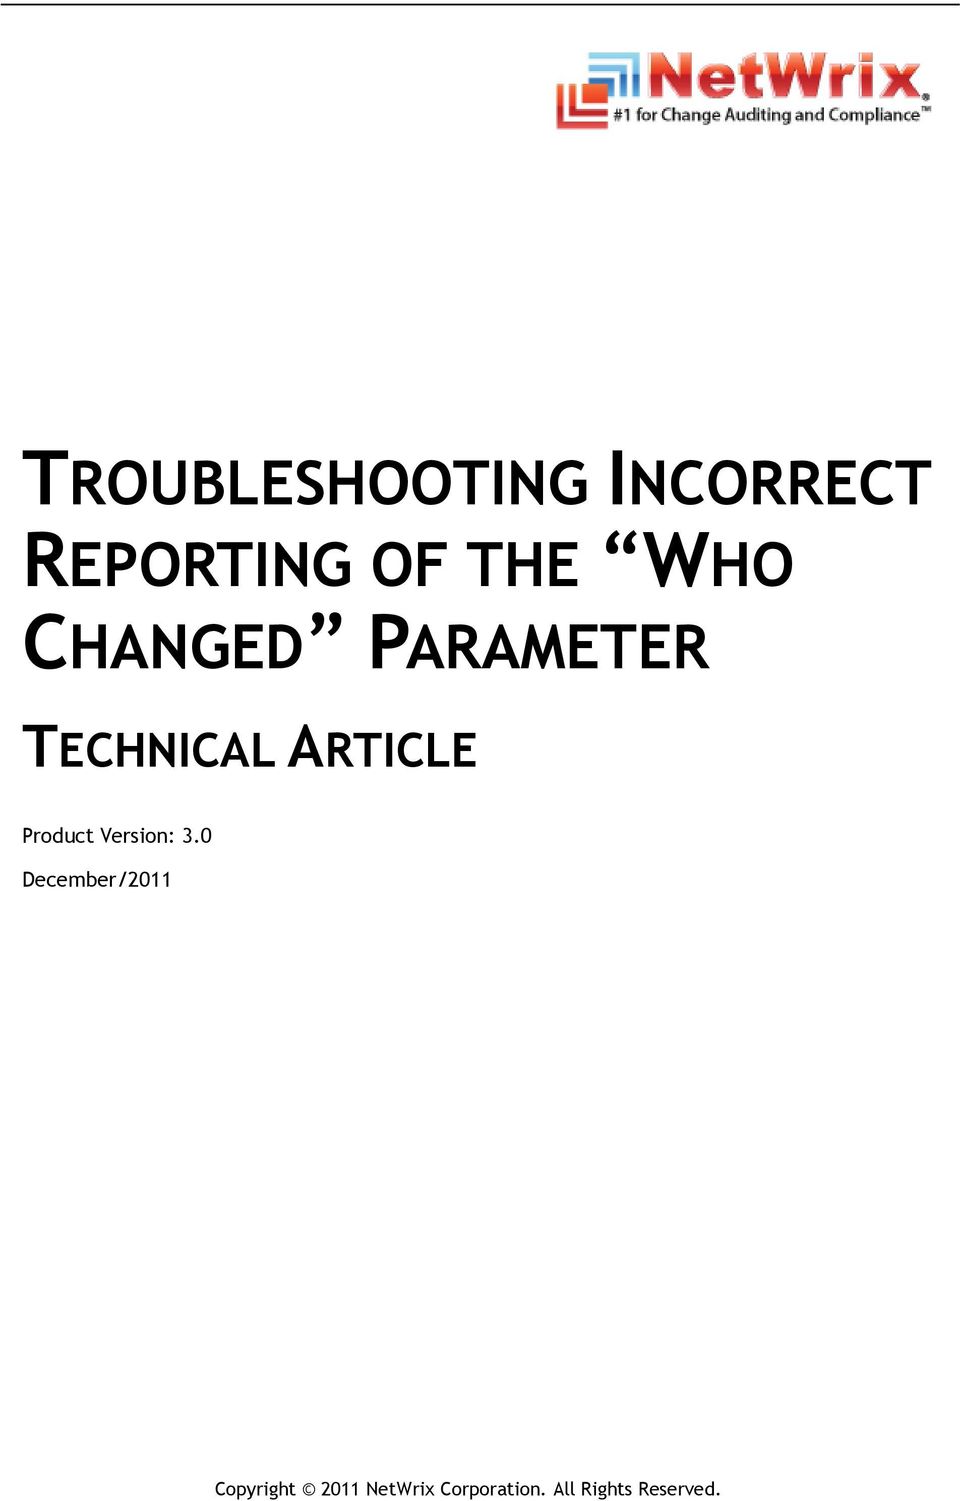 PARAMETER TECHNICAL ARTICLE